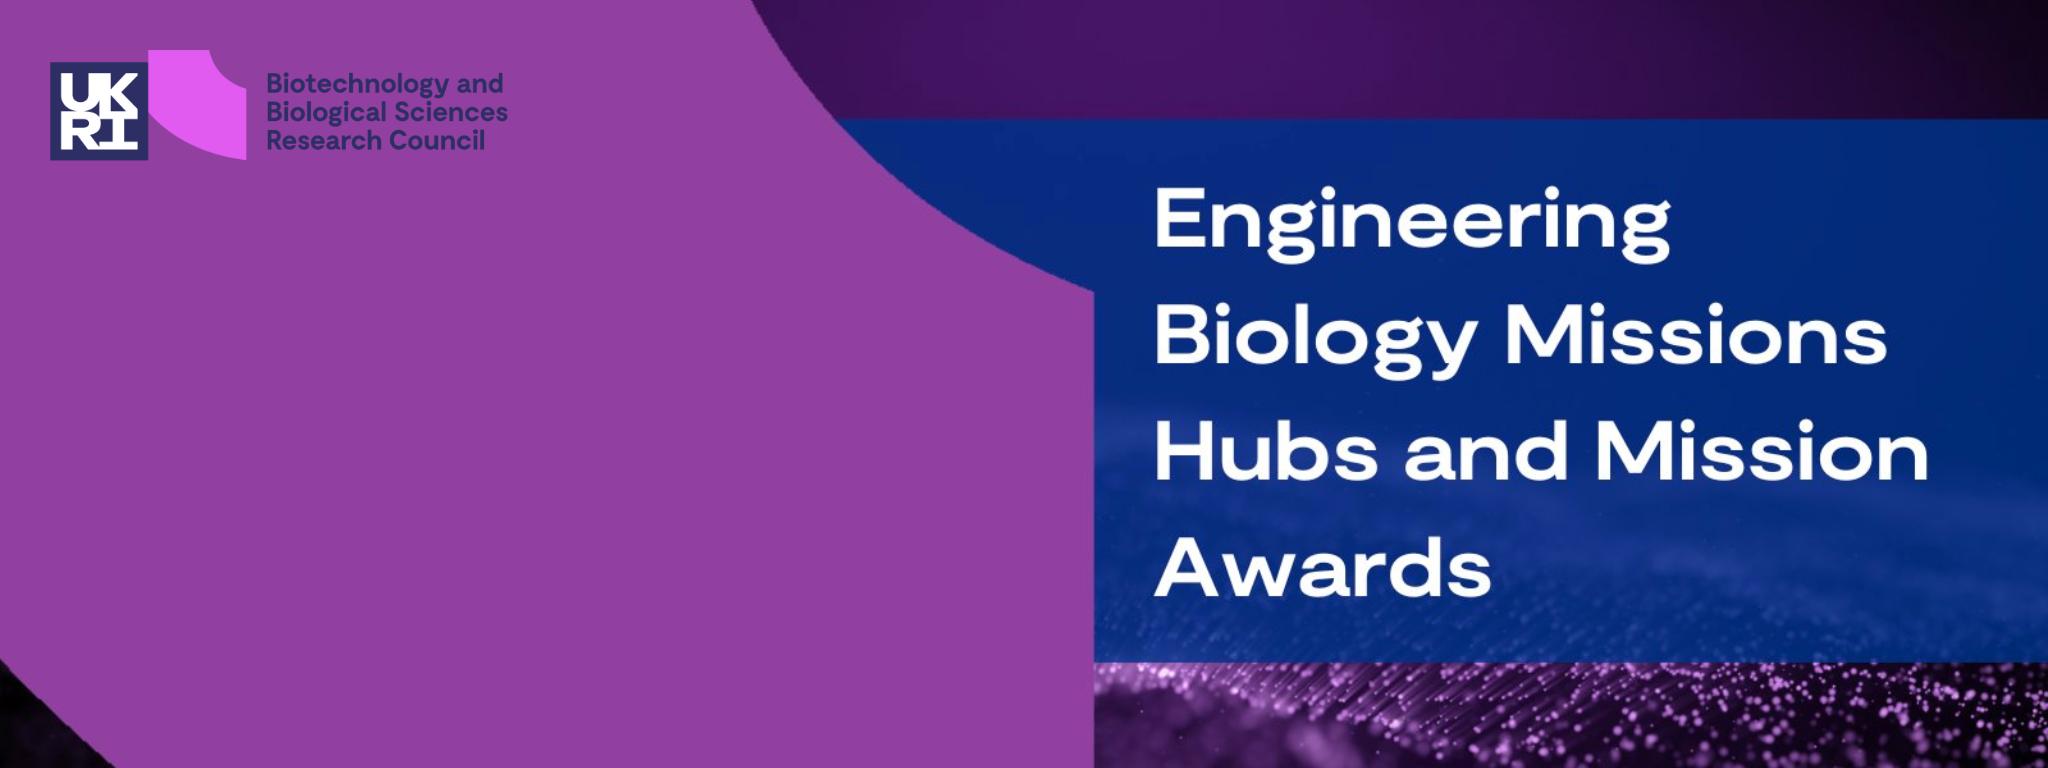 A purple background with a blue banner a white text reading “Engineering Biology Mission Hubs and Mission Awards”. The BBSRC logo is in the top left corner.